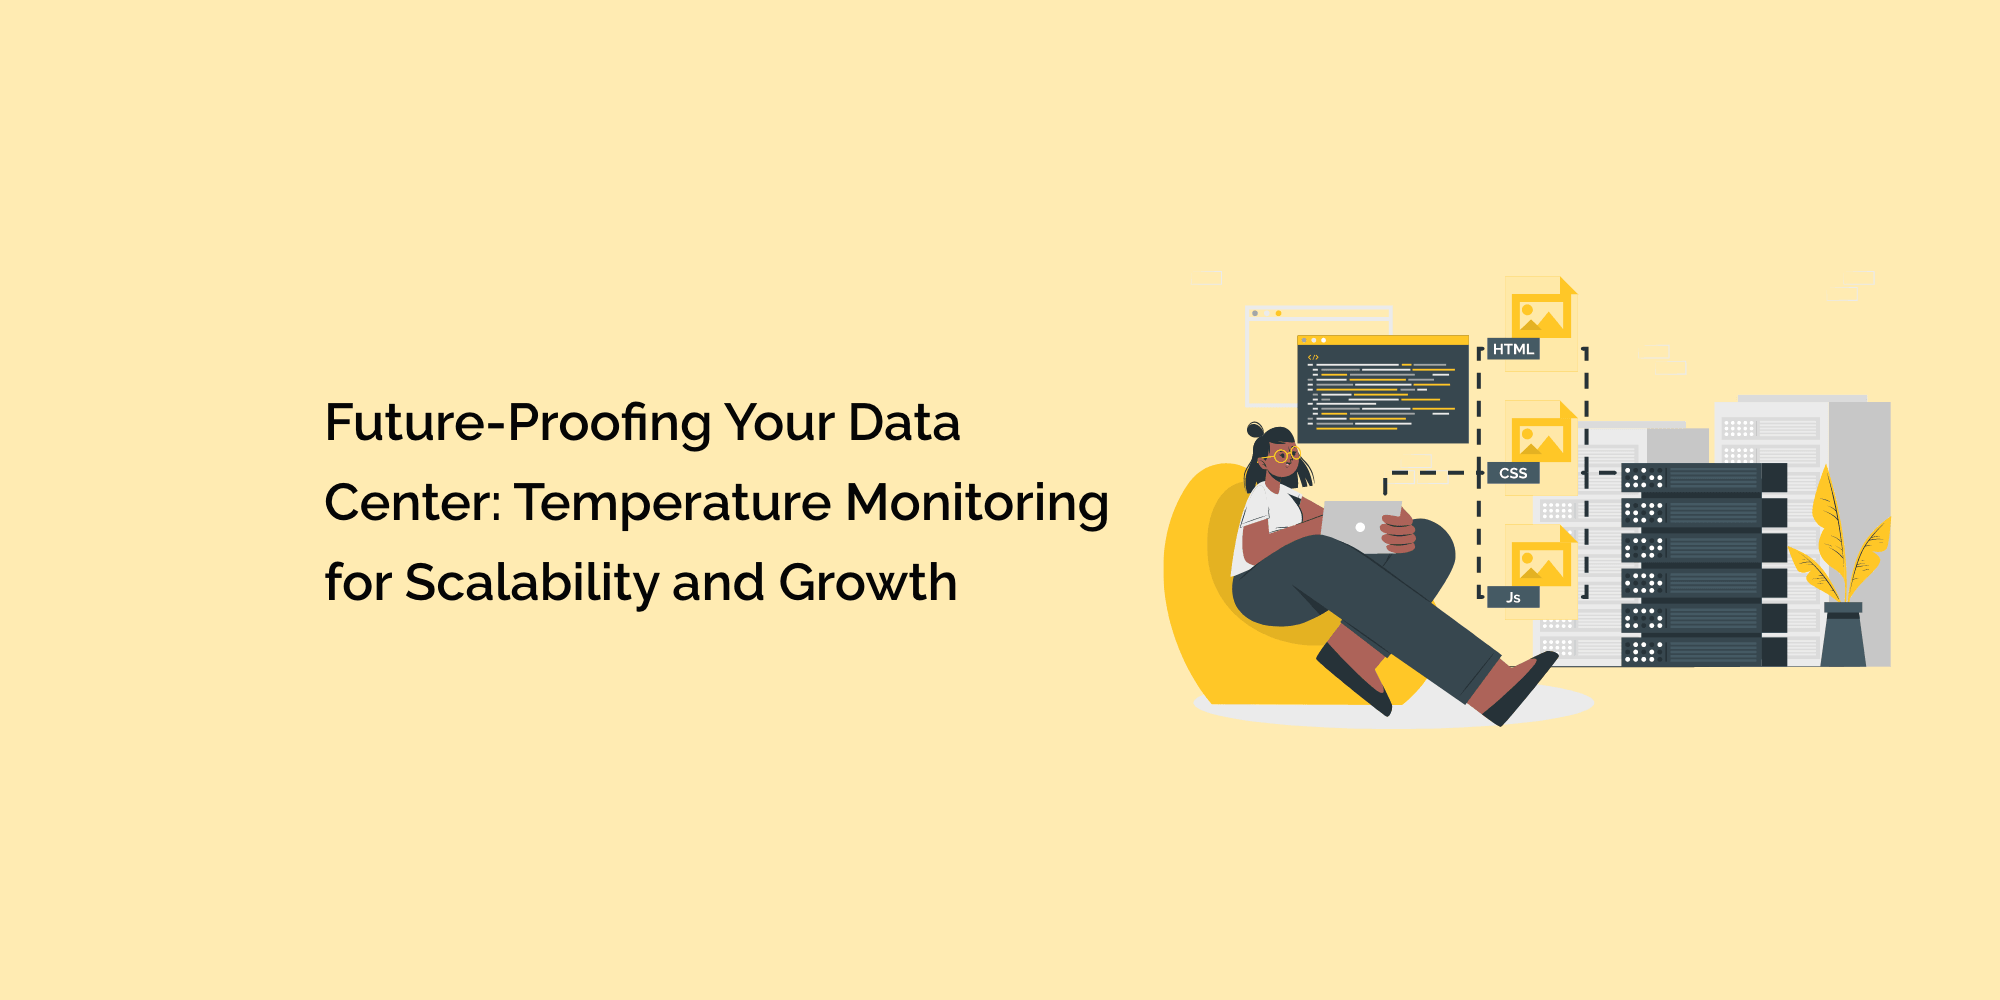 Future-Proofing Your Data Center: Temperature Monitoring for Scalability and Growth